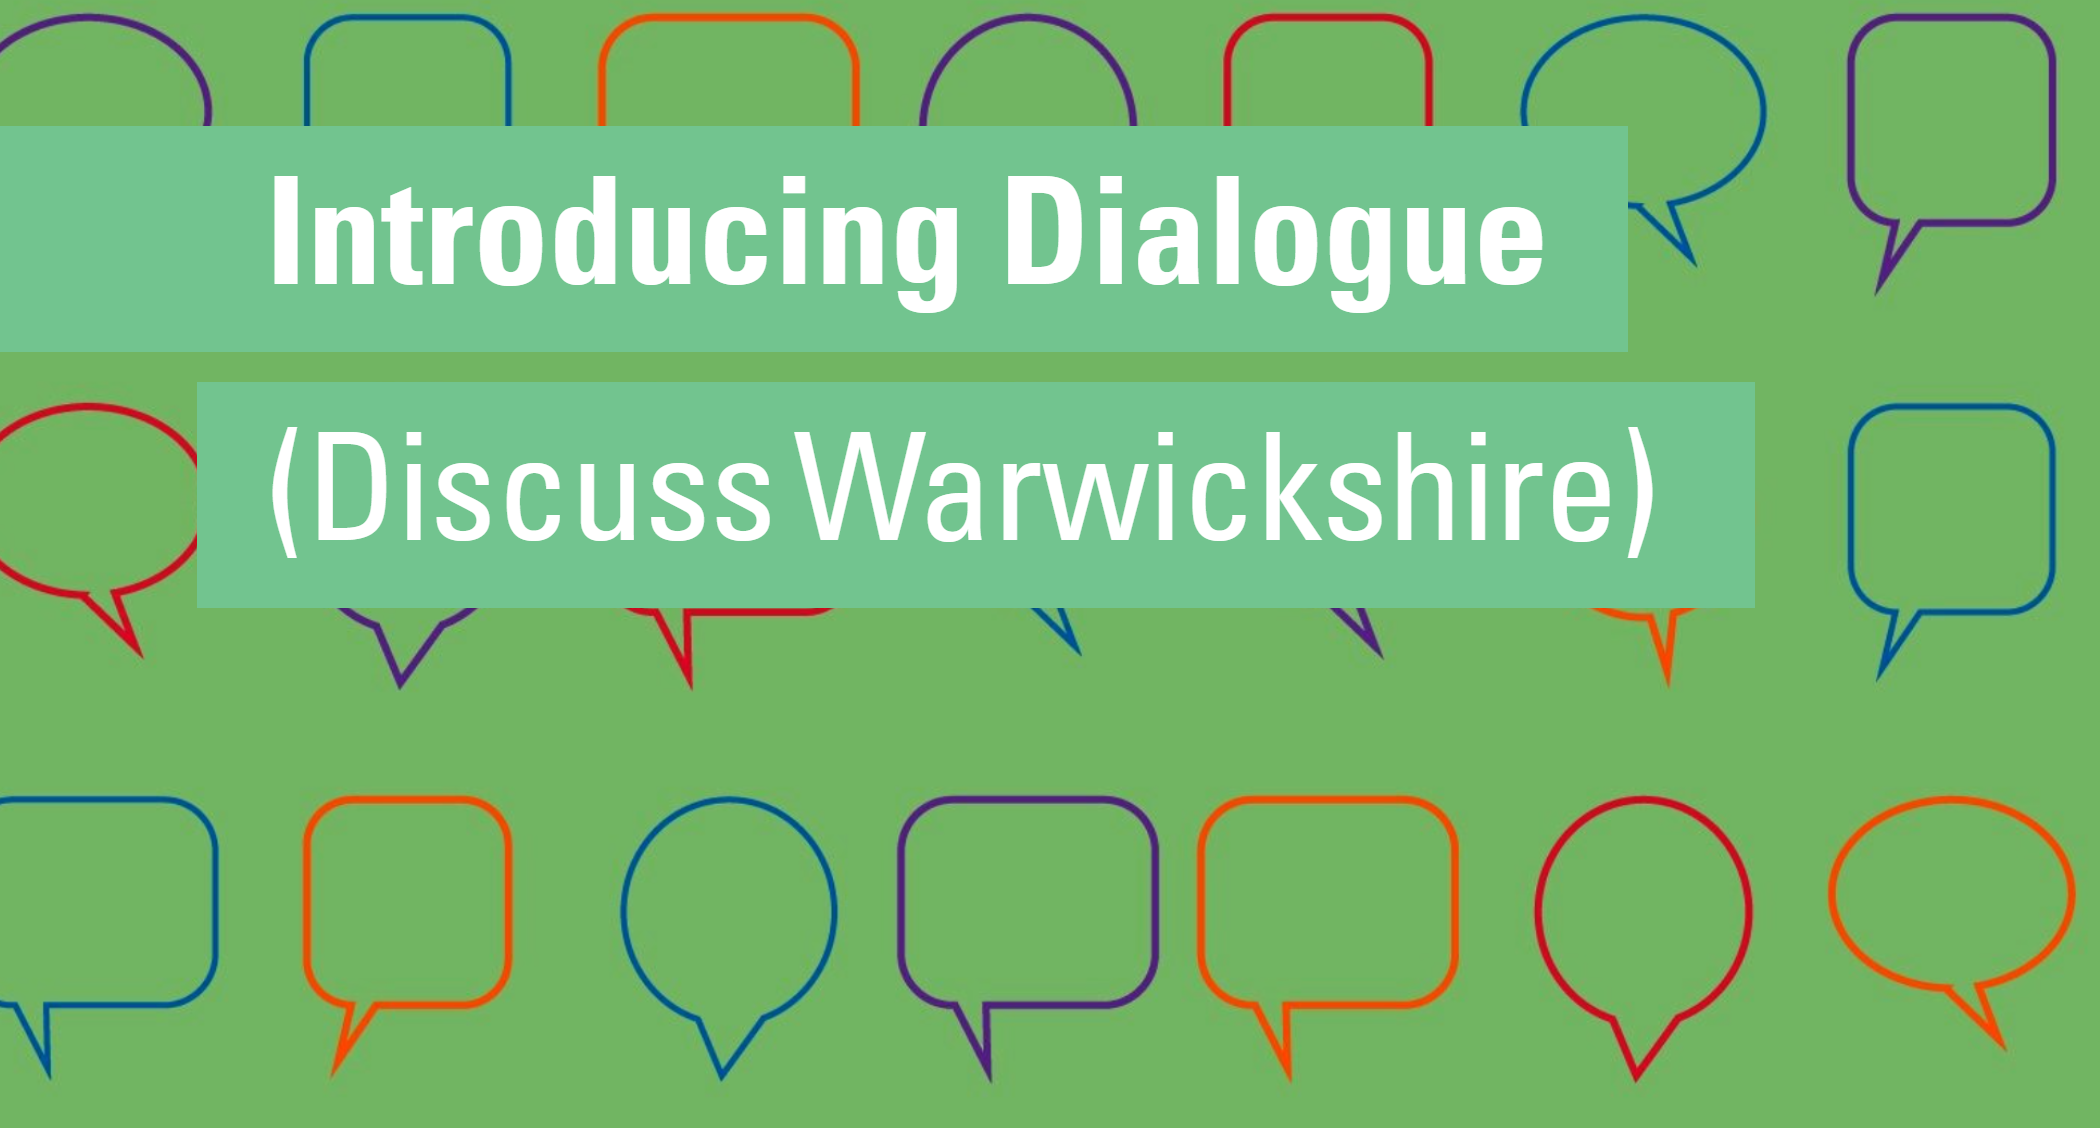 Introducing Dialogue (Discuss Warwickshire) white text on a green background featuring coloured speech bubble outlines